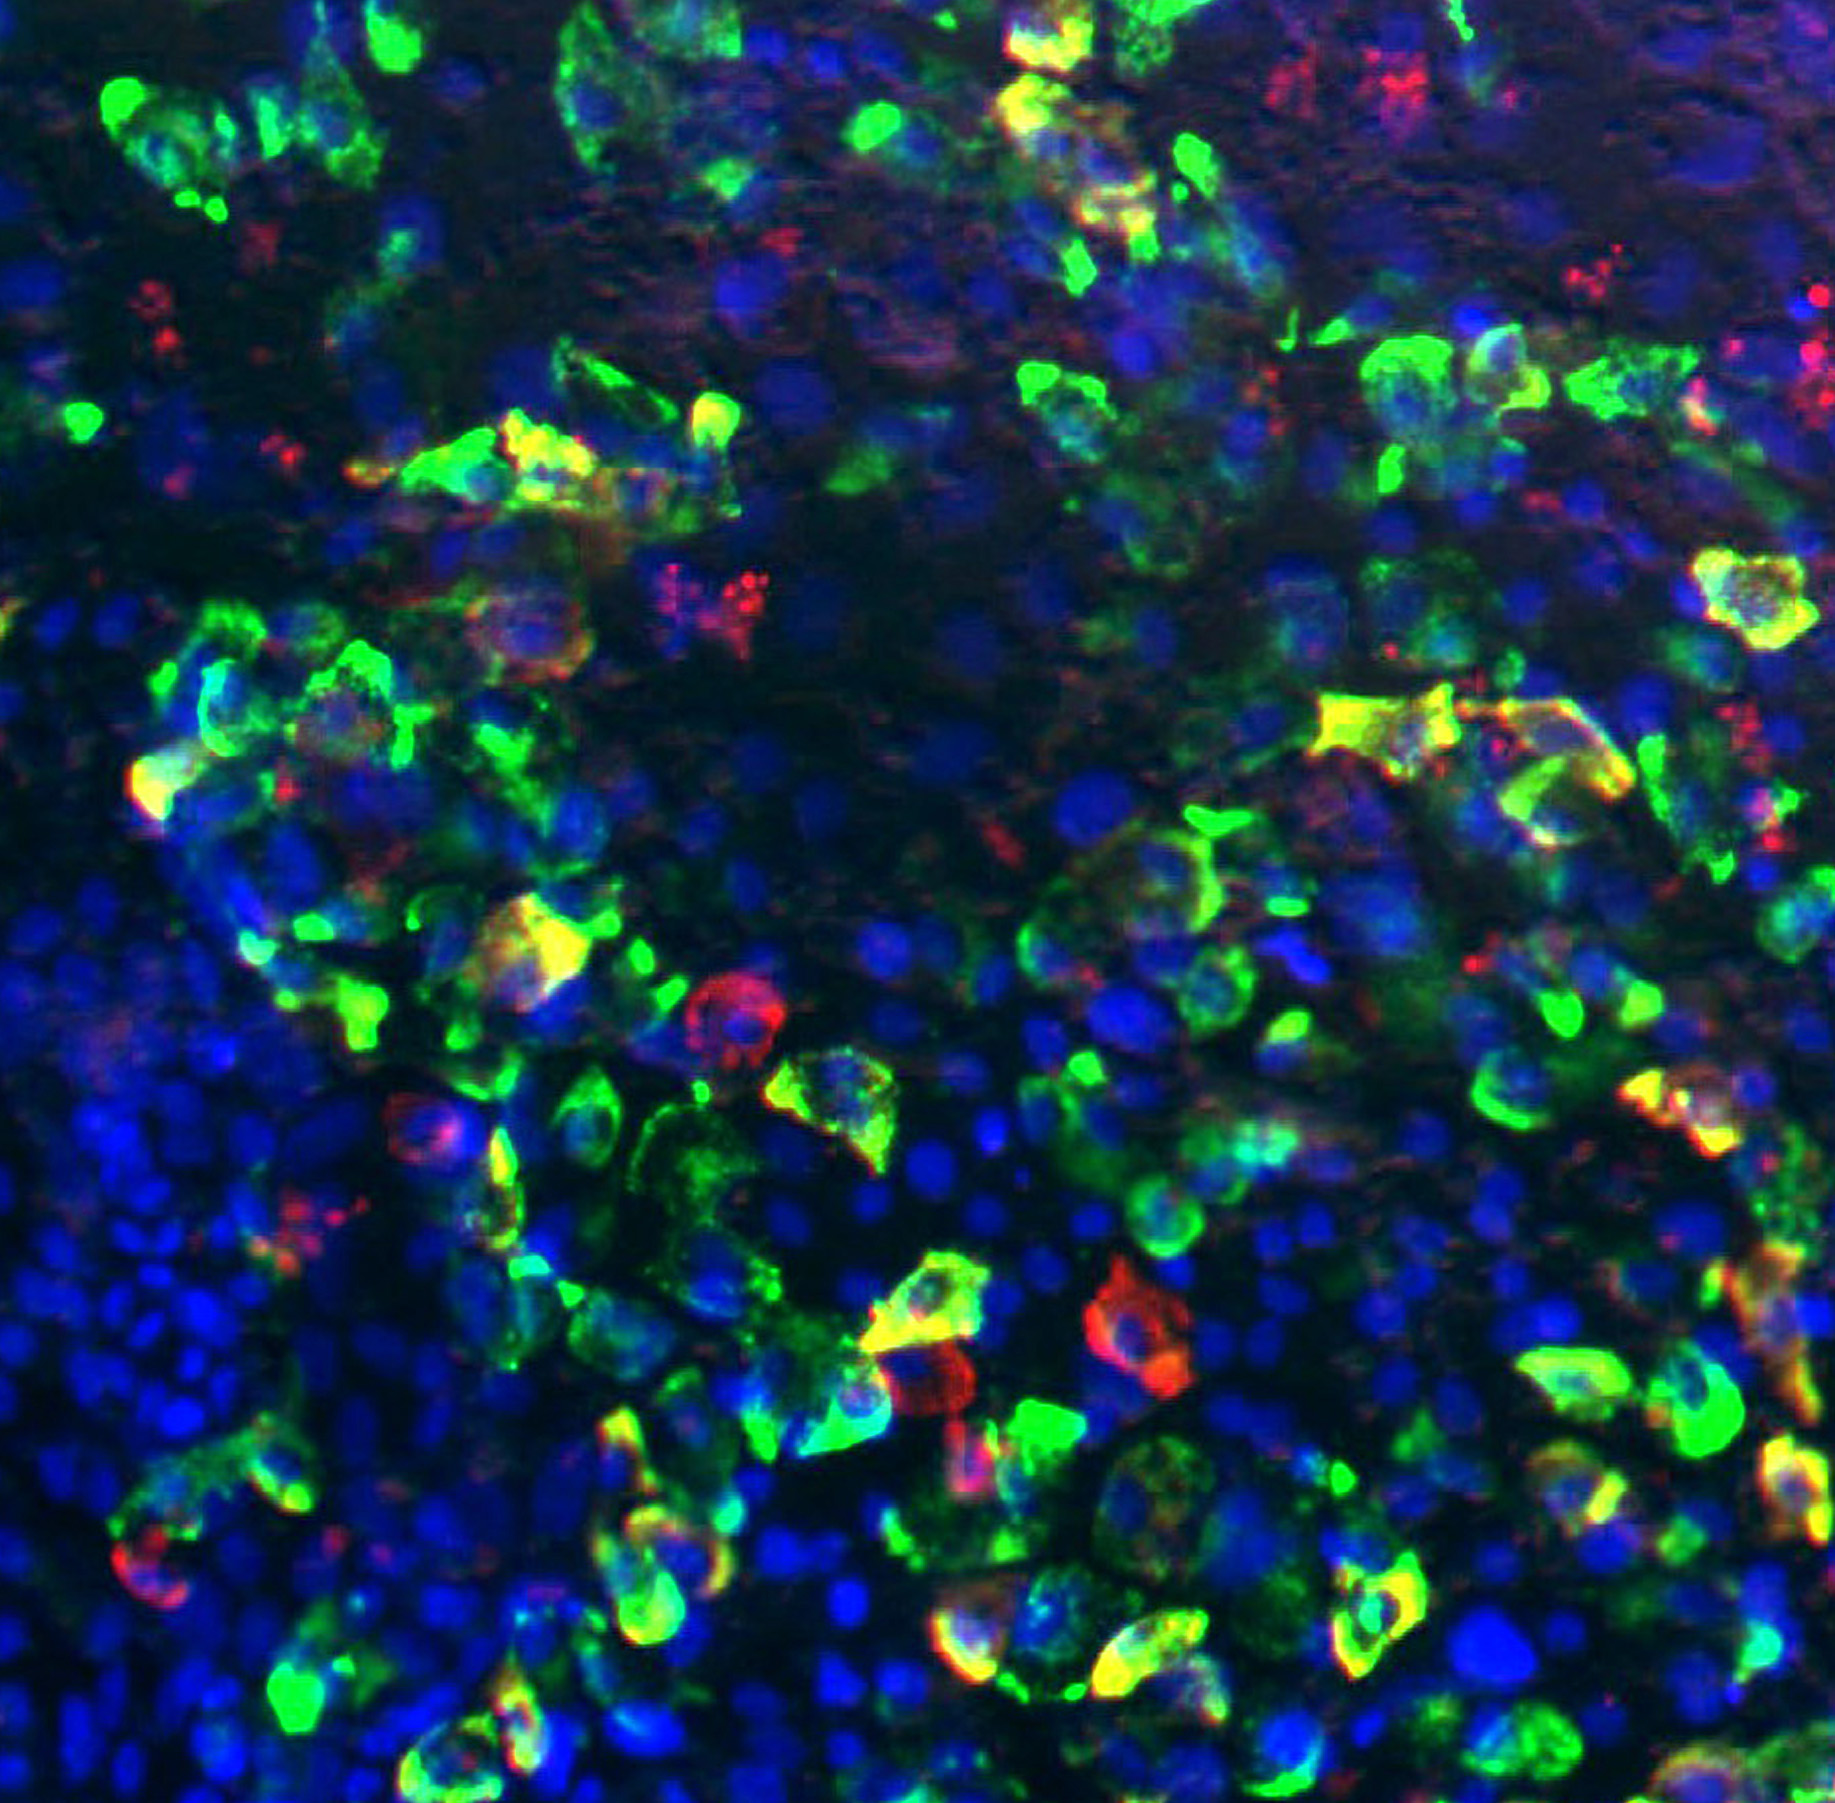 Figure 2. An image acquired using a fluorescent microscope showing the generation of islet-like cells from iPSCs (green: Insulin; red: Glucagon; blue: DAPI, that stains the nuclei of cells).